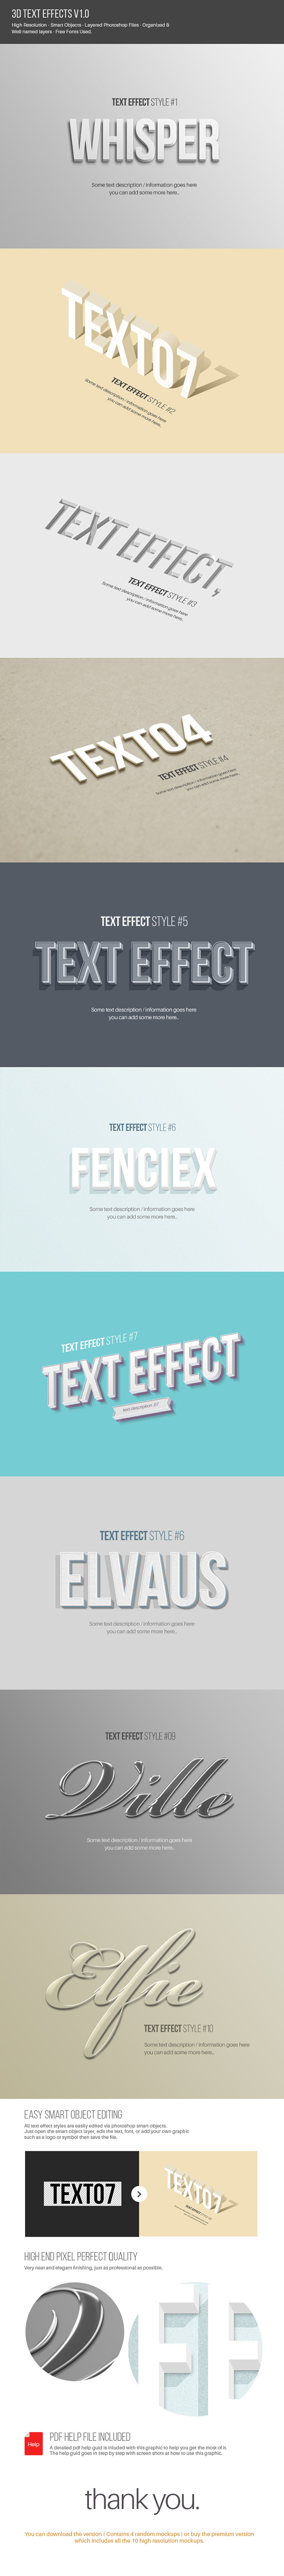 Free Text Effects V1.0